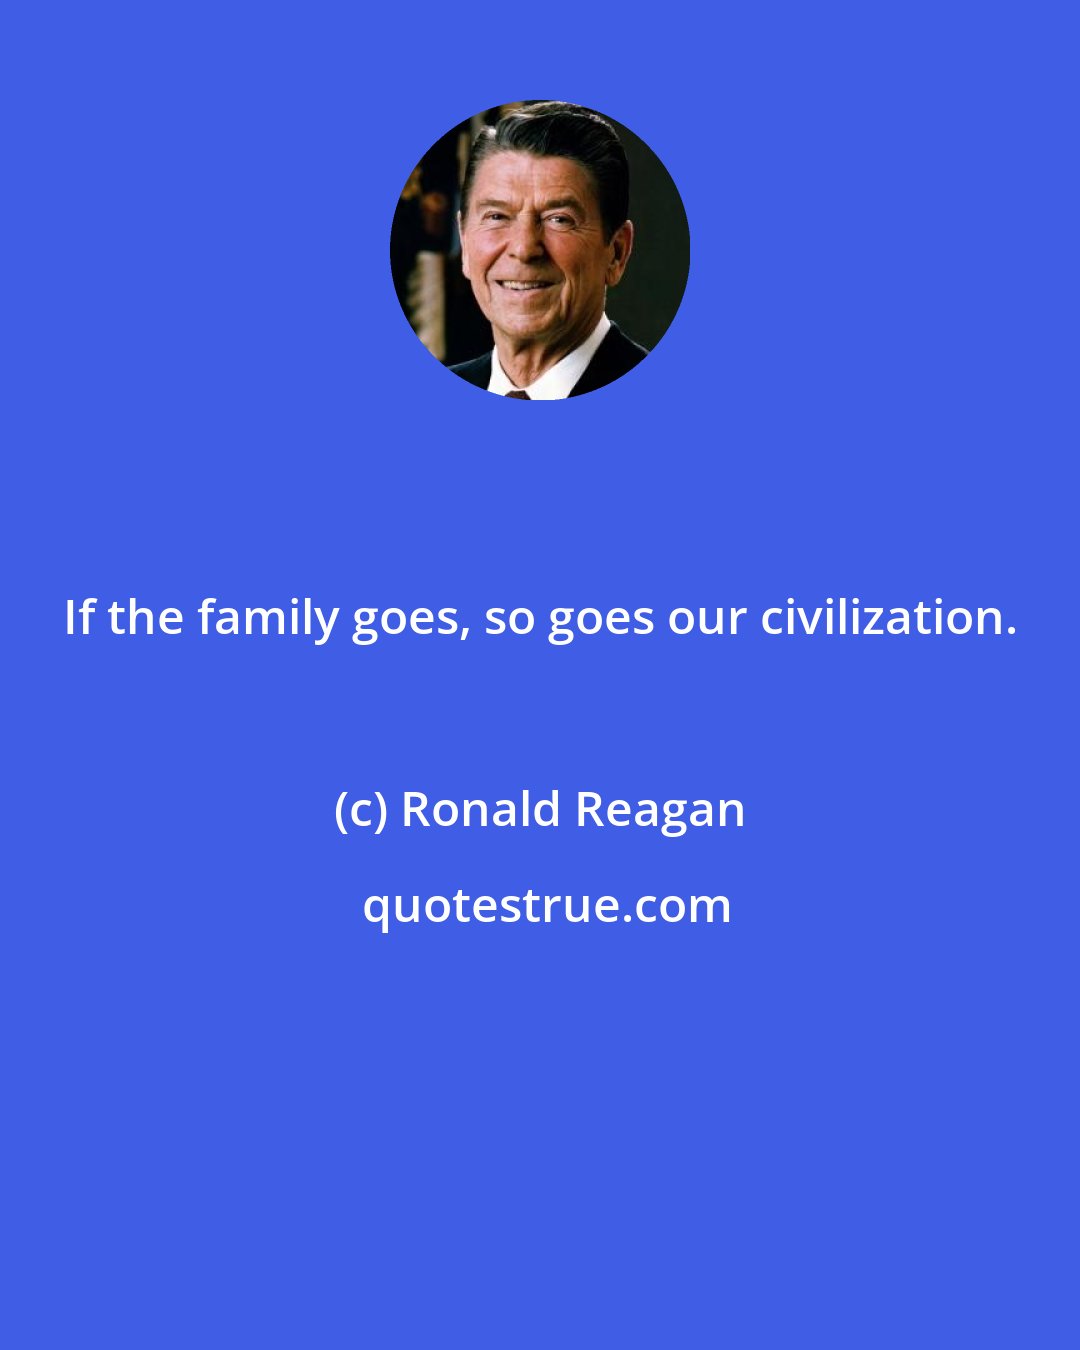 Ronald Reagan: If the family goes, so goes our civilization.